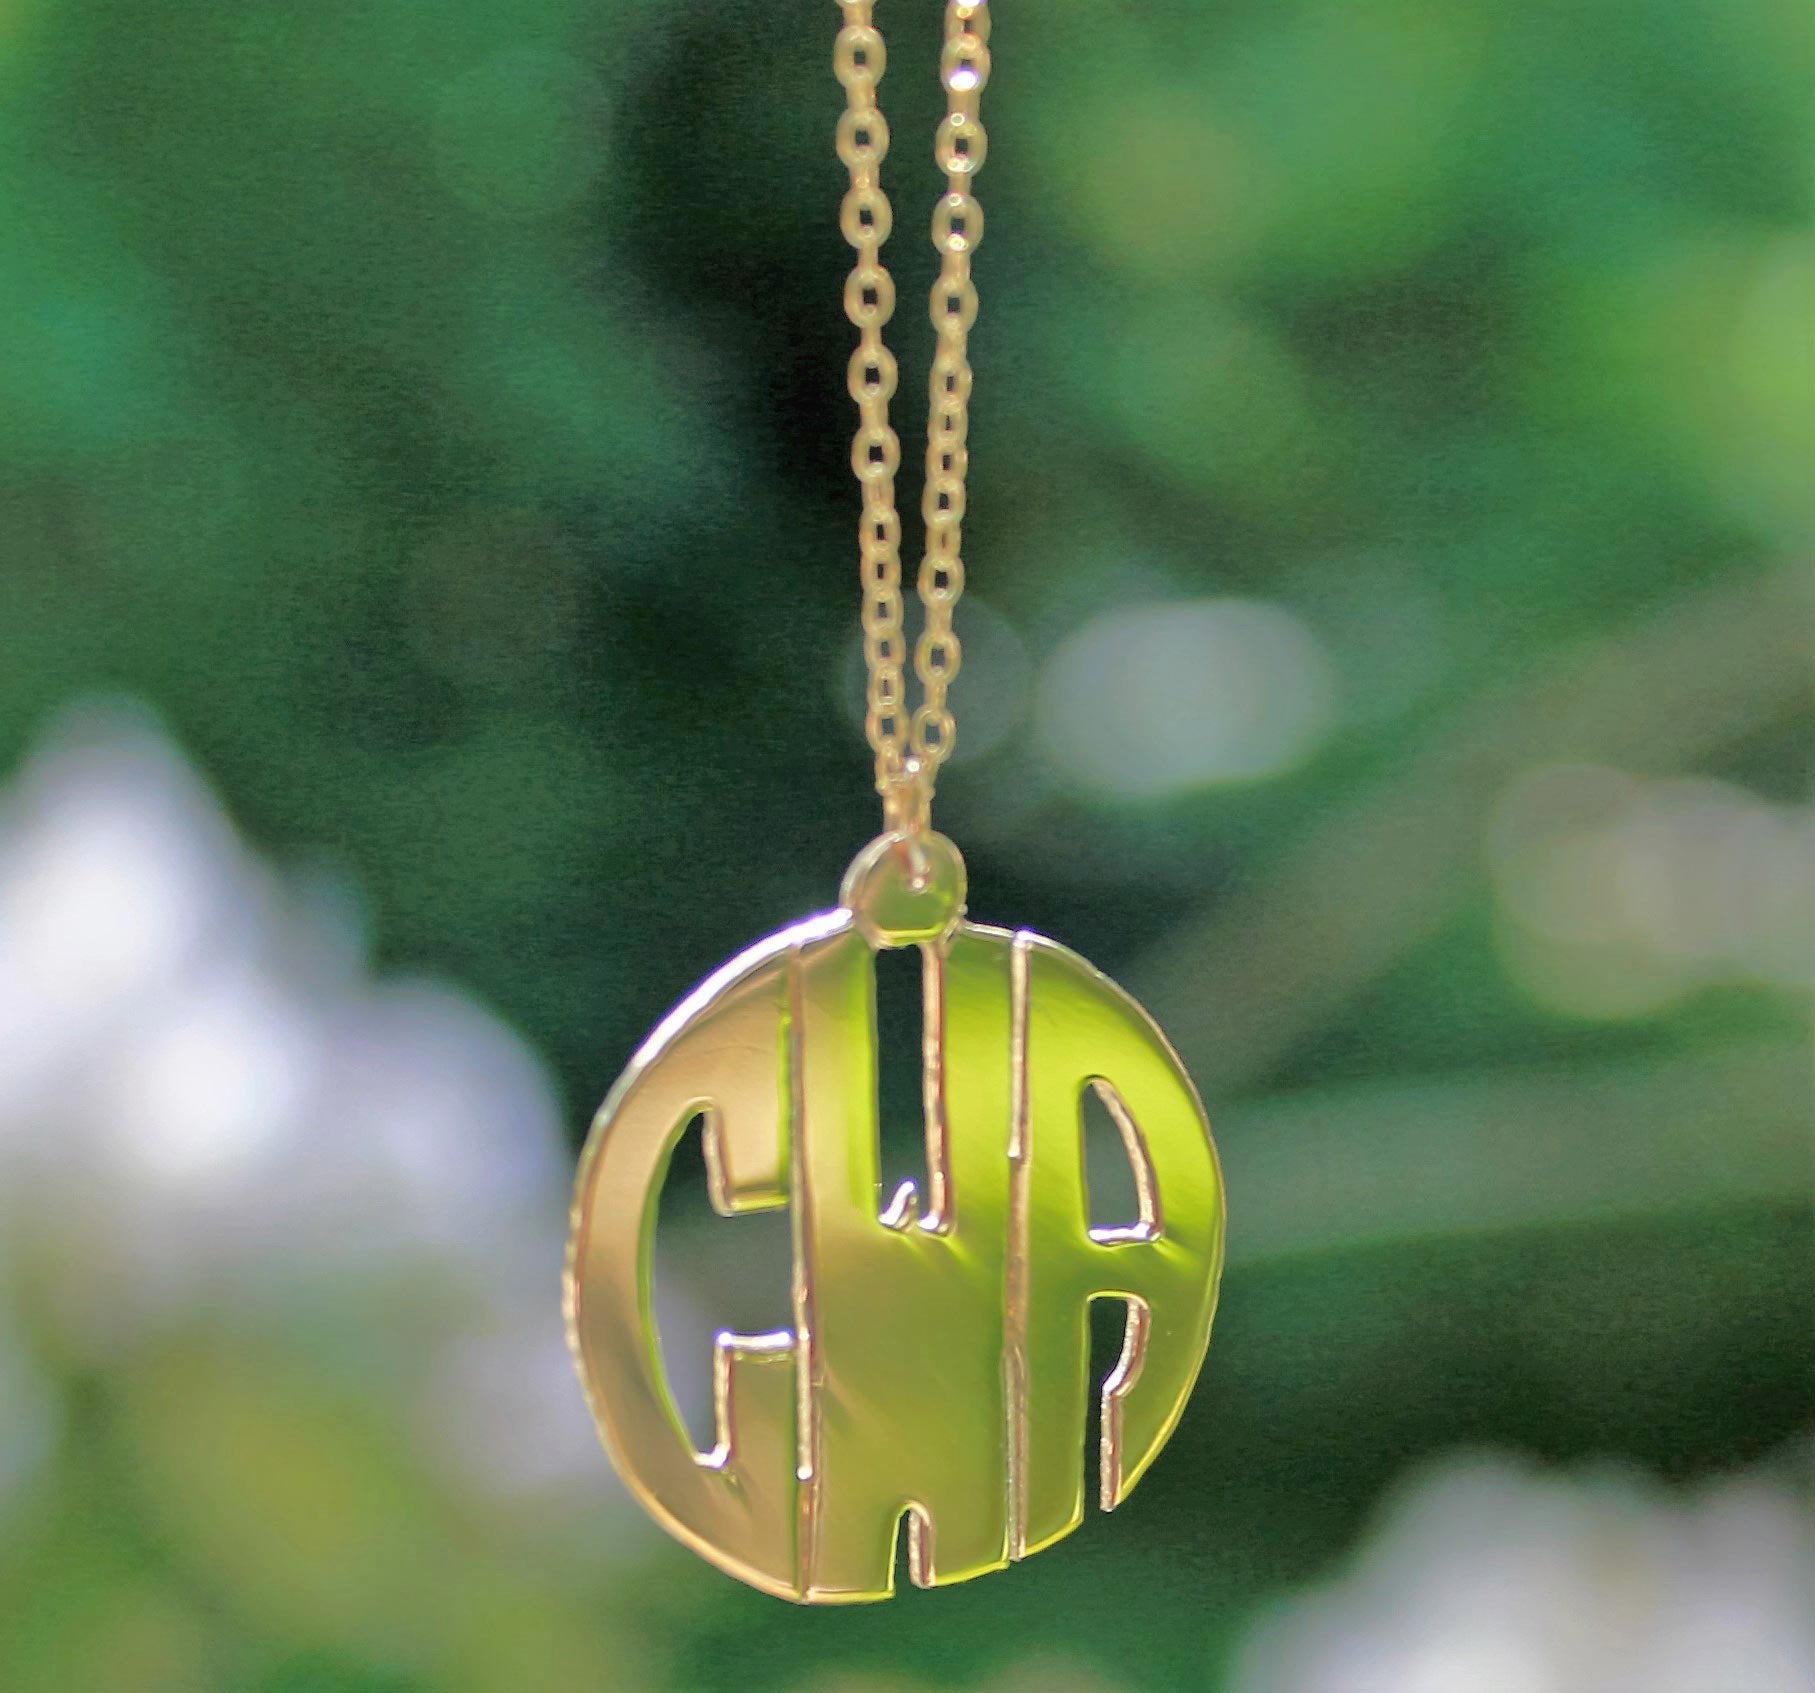 Block Letter Monogram Necklace in 10K Yellow Gold